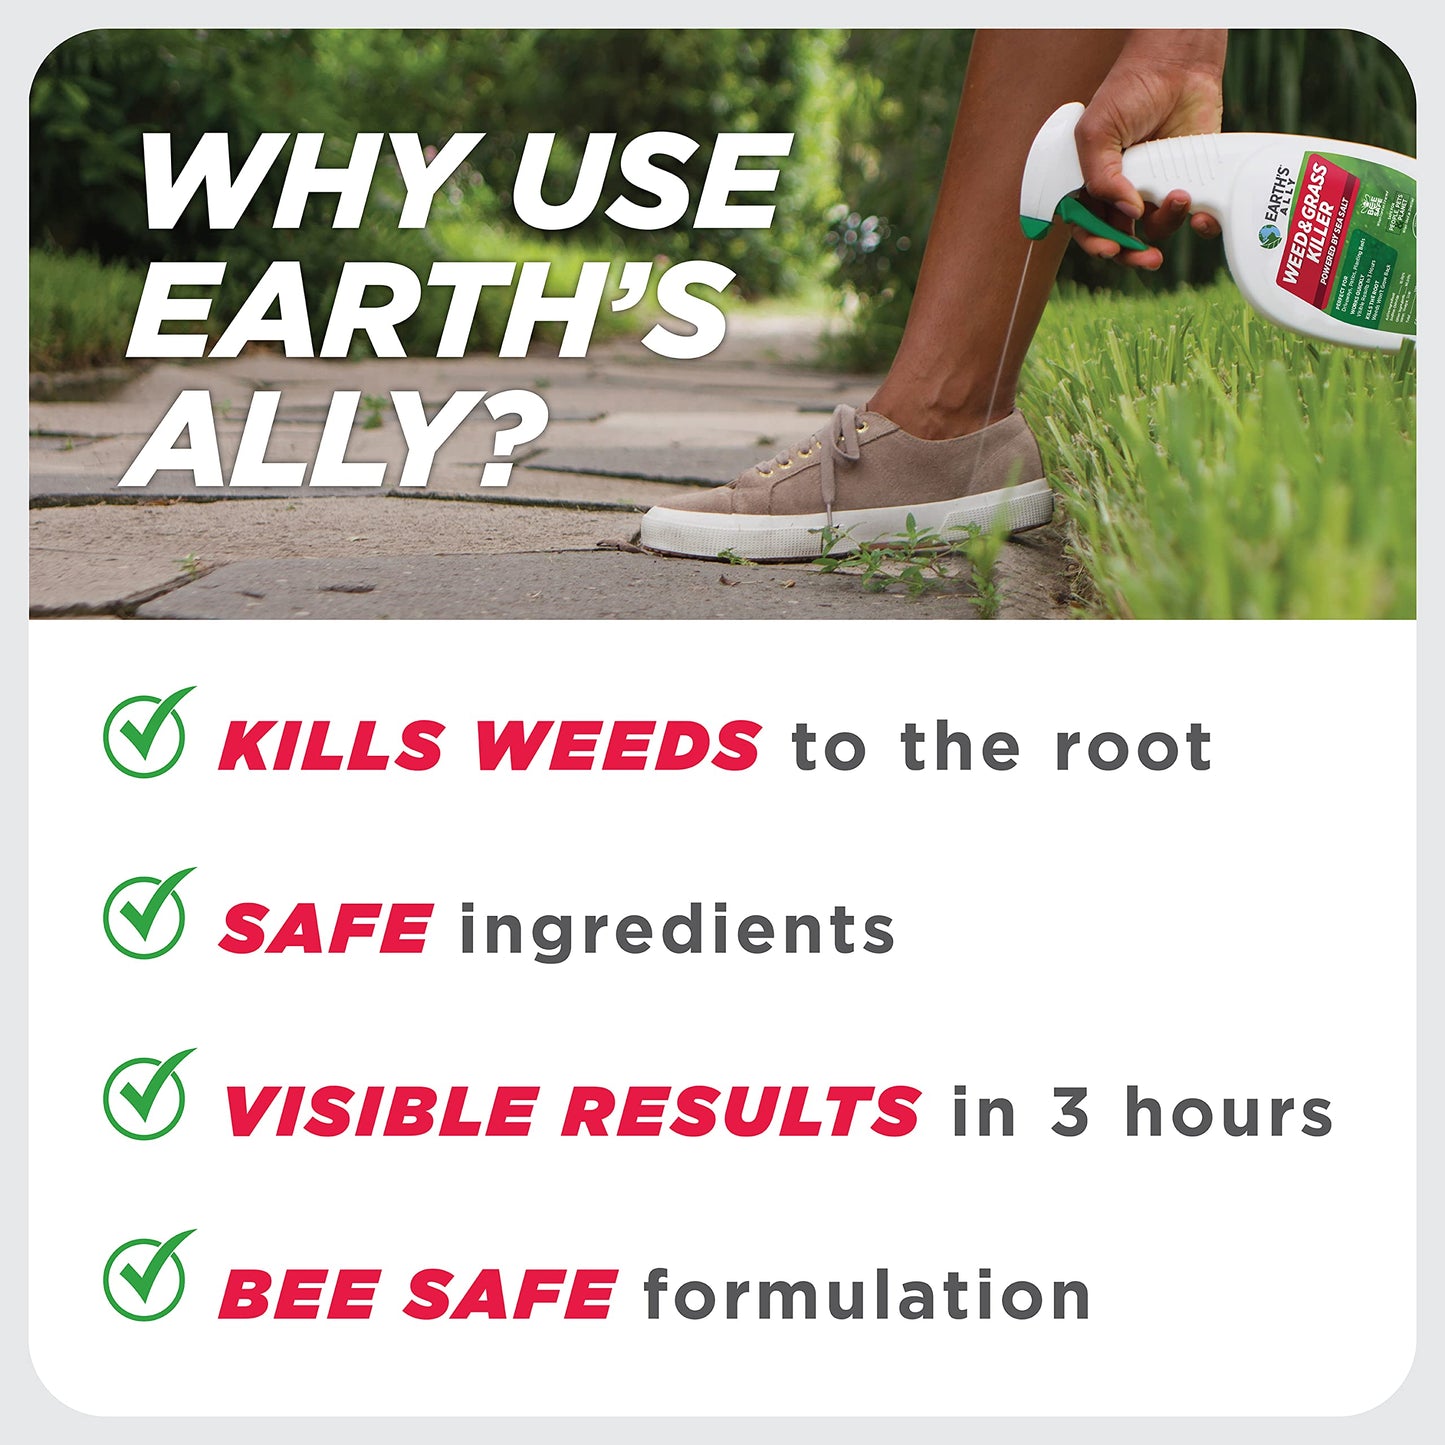 Earth's Ally Weed and Grass Killer | Safe, Pet-Friendly Natural Weed Control Spray for Driveways & Sidewalks, Ready-to-Use 1 Gallon - Bee Safe, No Glyphosate Weed Killer